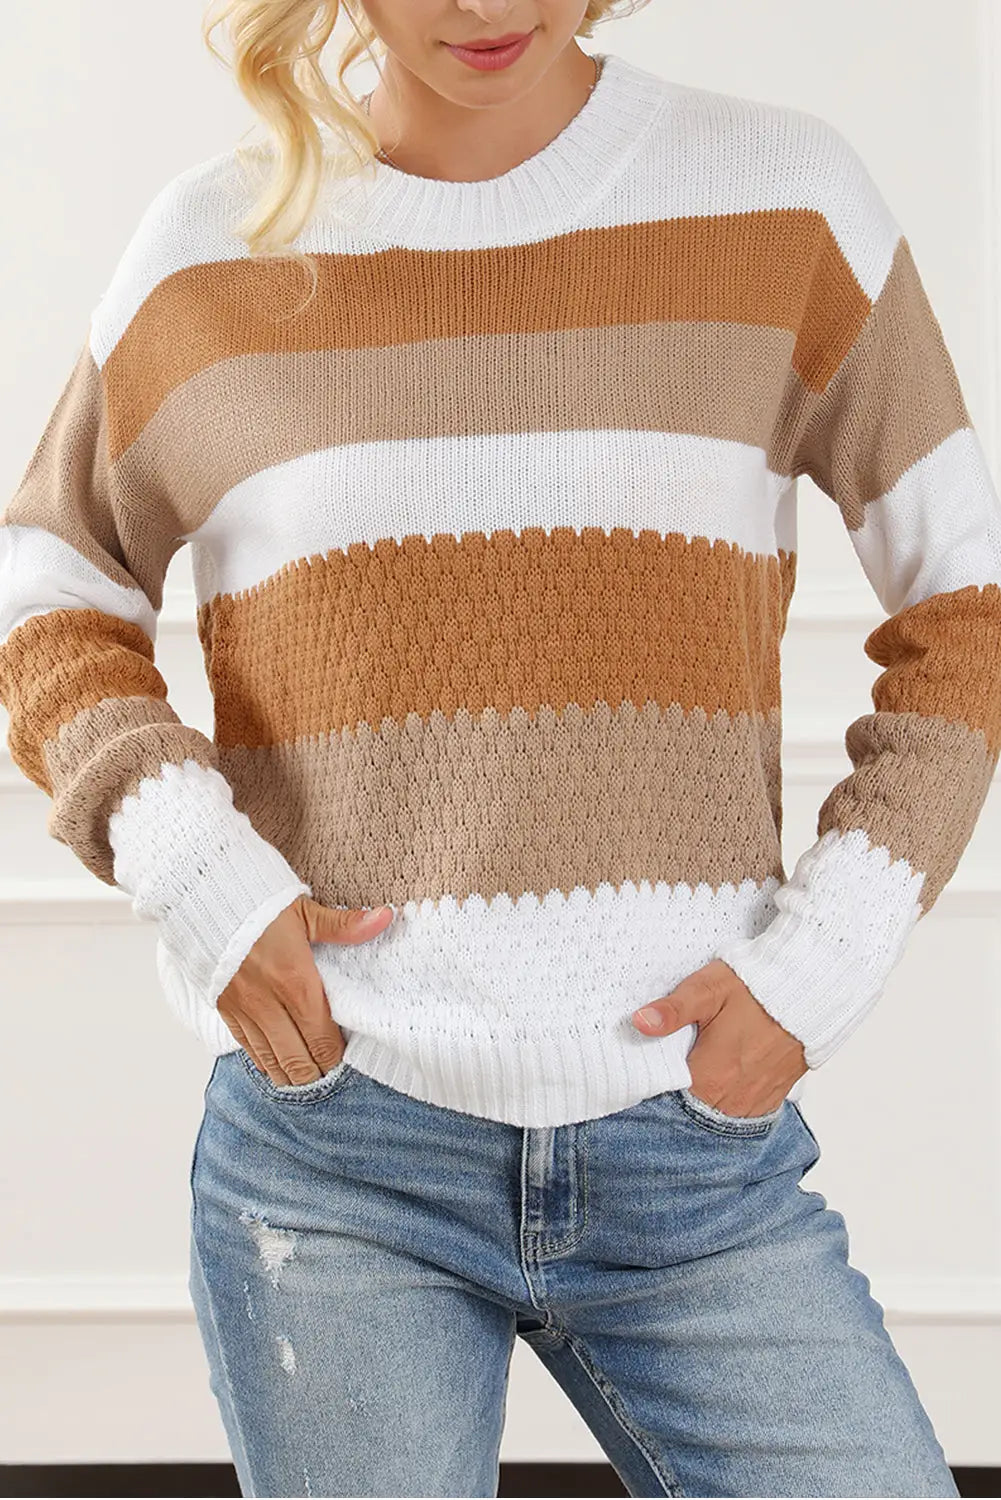 Chestnut striped cable knit drop shoulder sweater - l / 100% acrylic - sweaters & cardigans